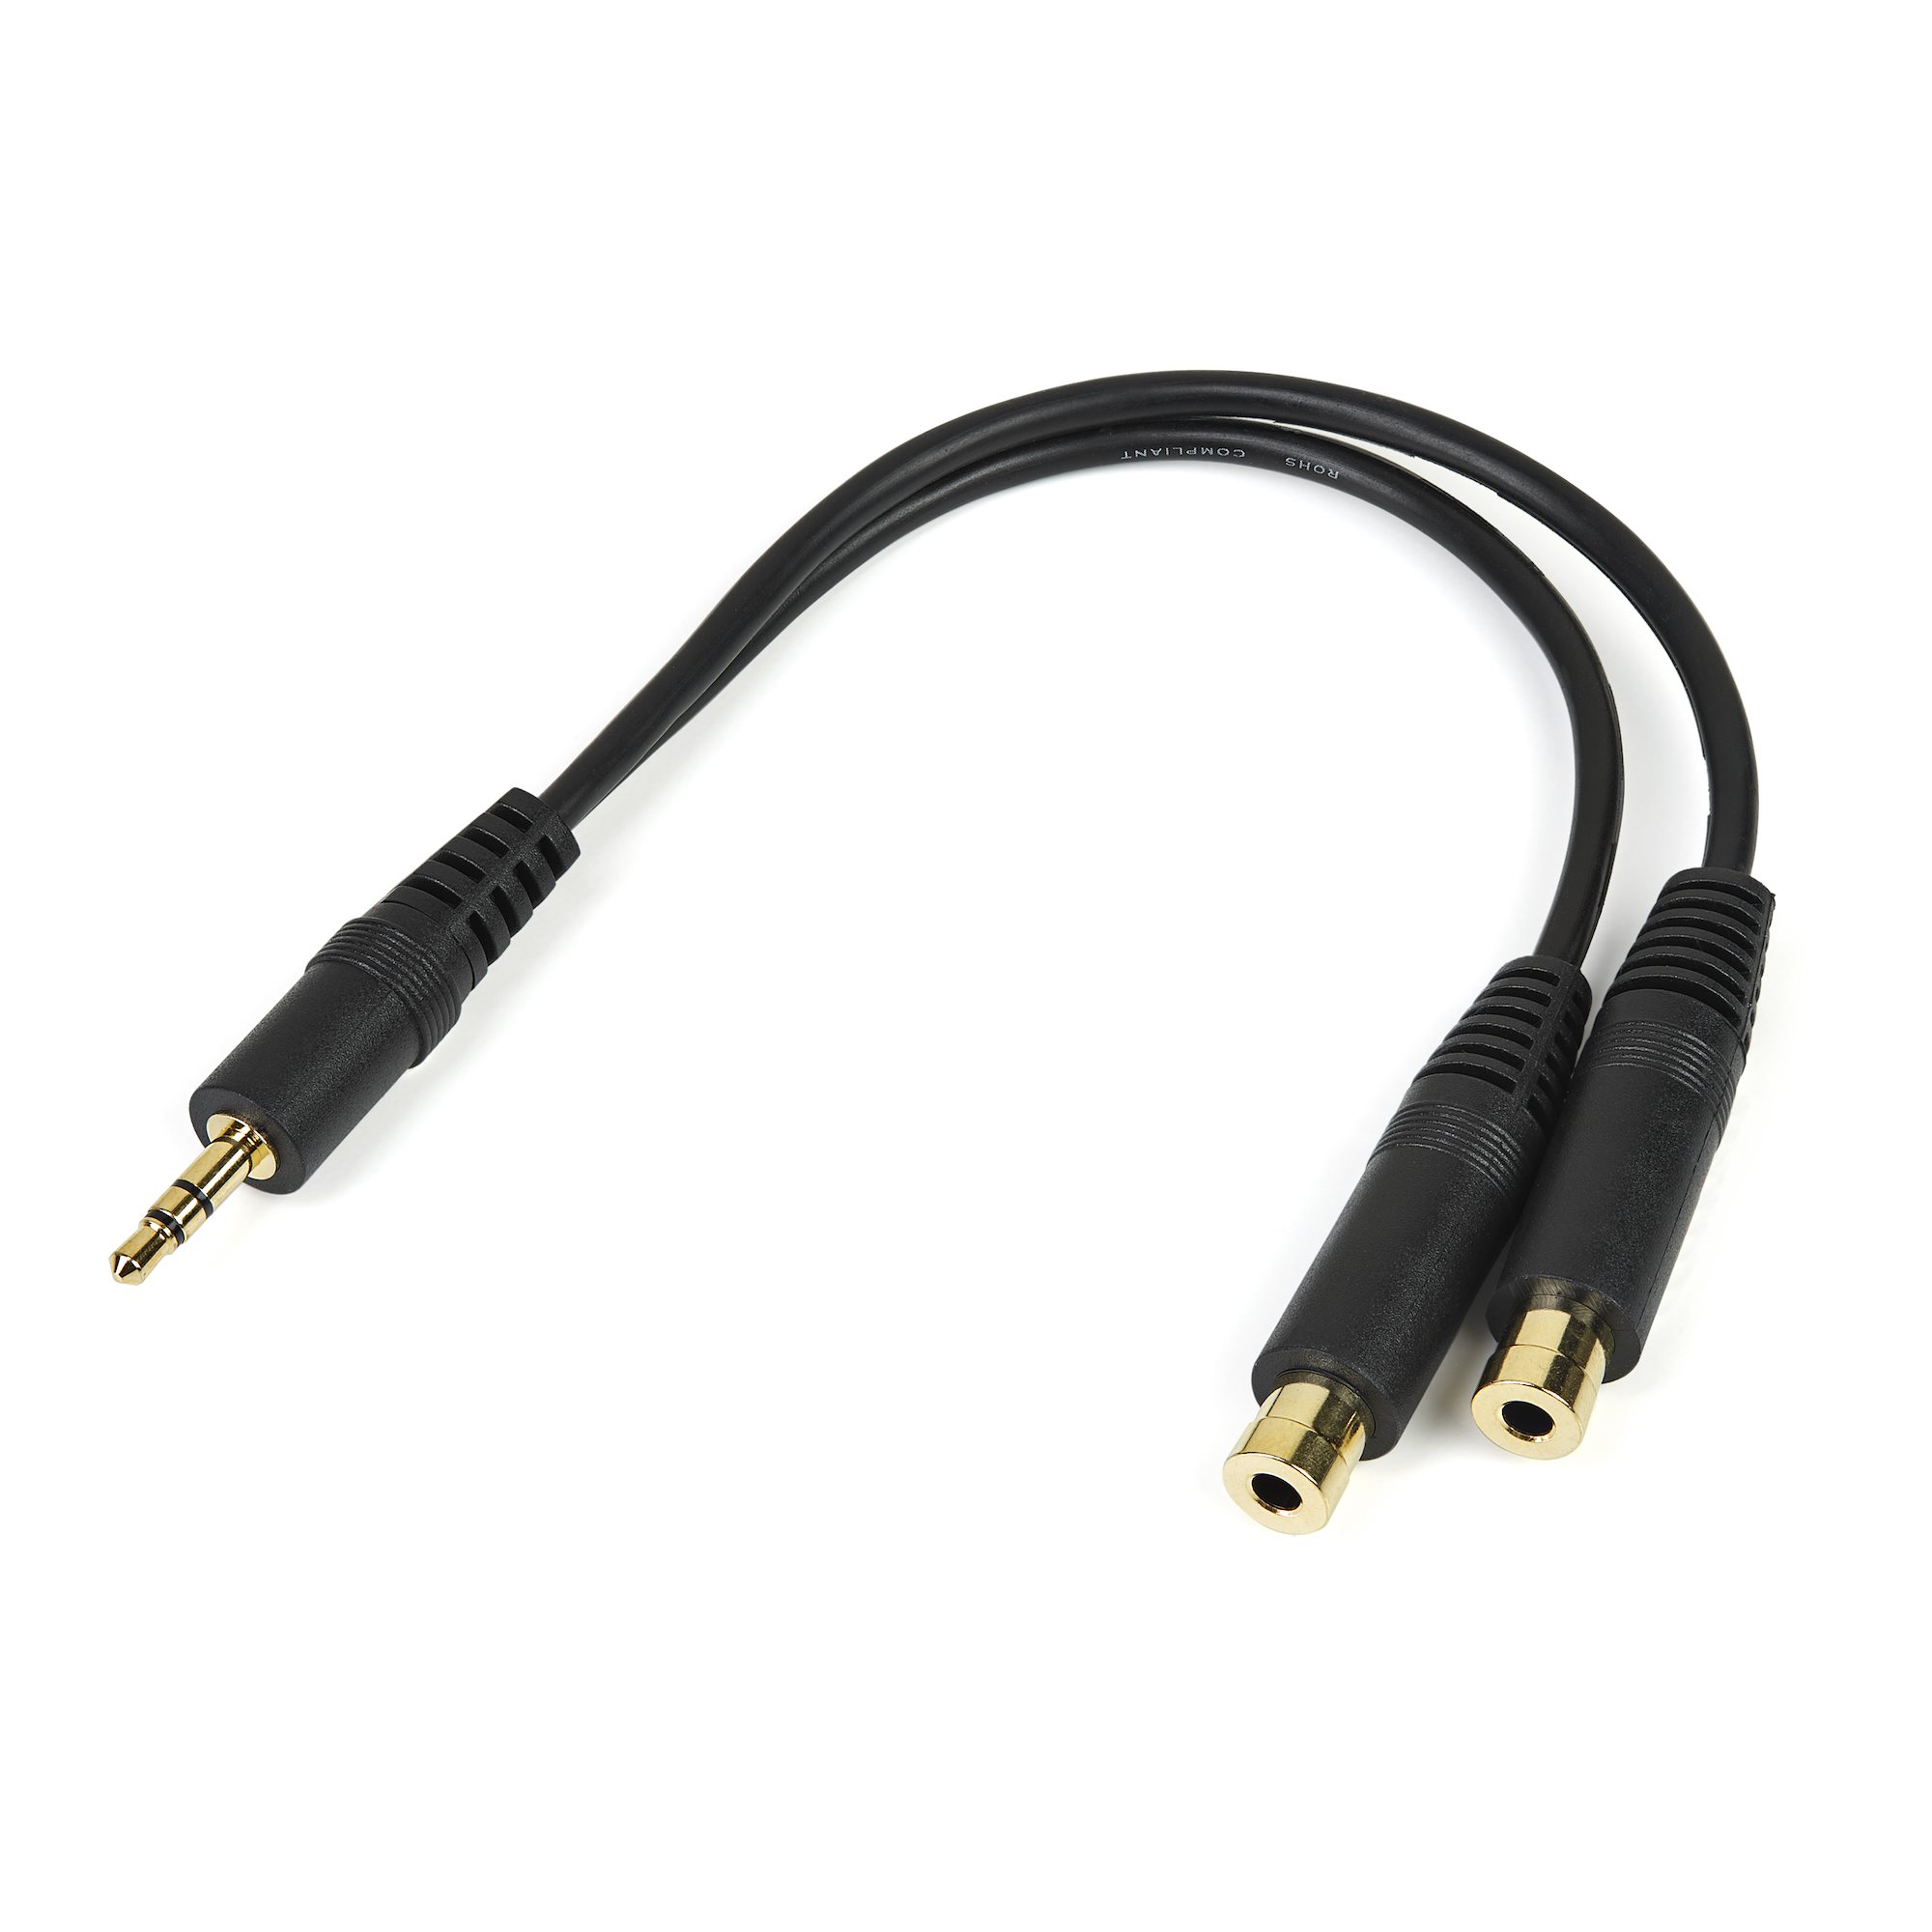 6in Stereo Splitter Cable - 3.5mm Male to 2x 3.5mm Female